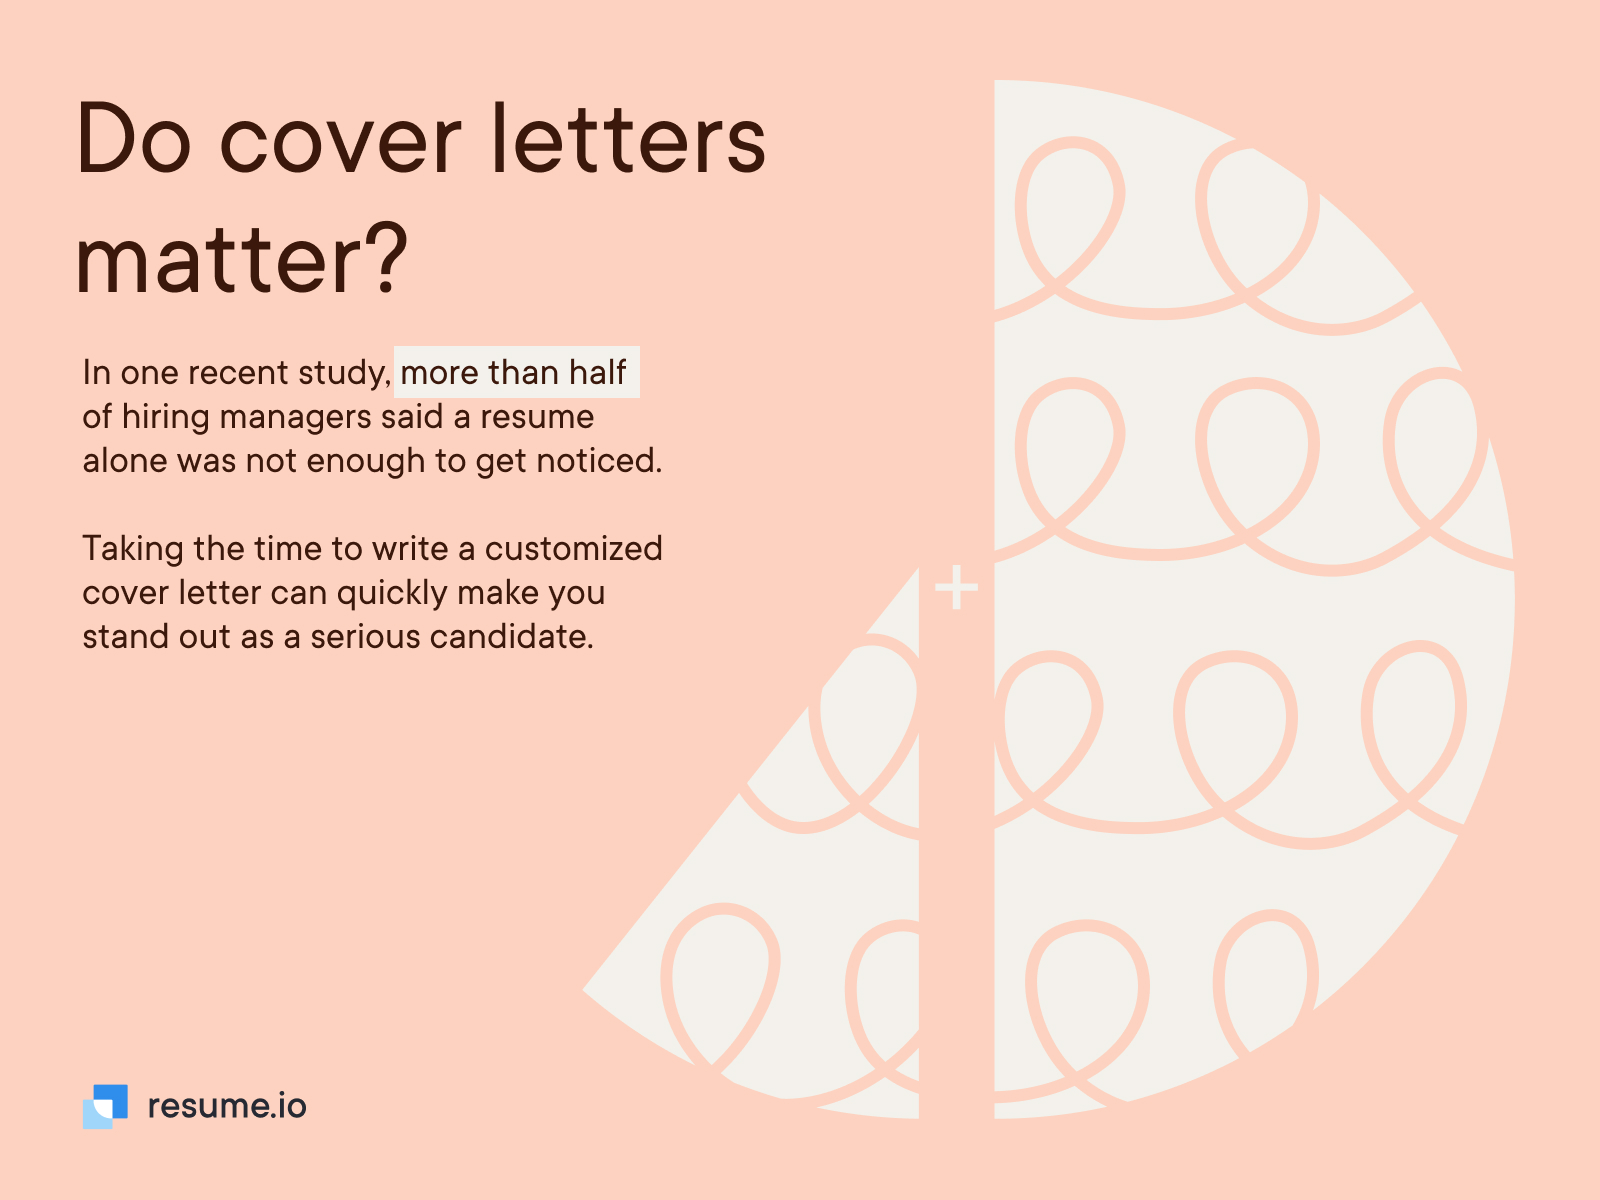 Do cover letters matter?